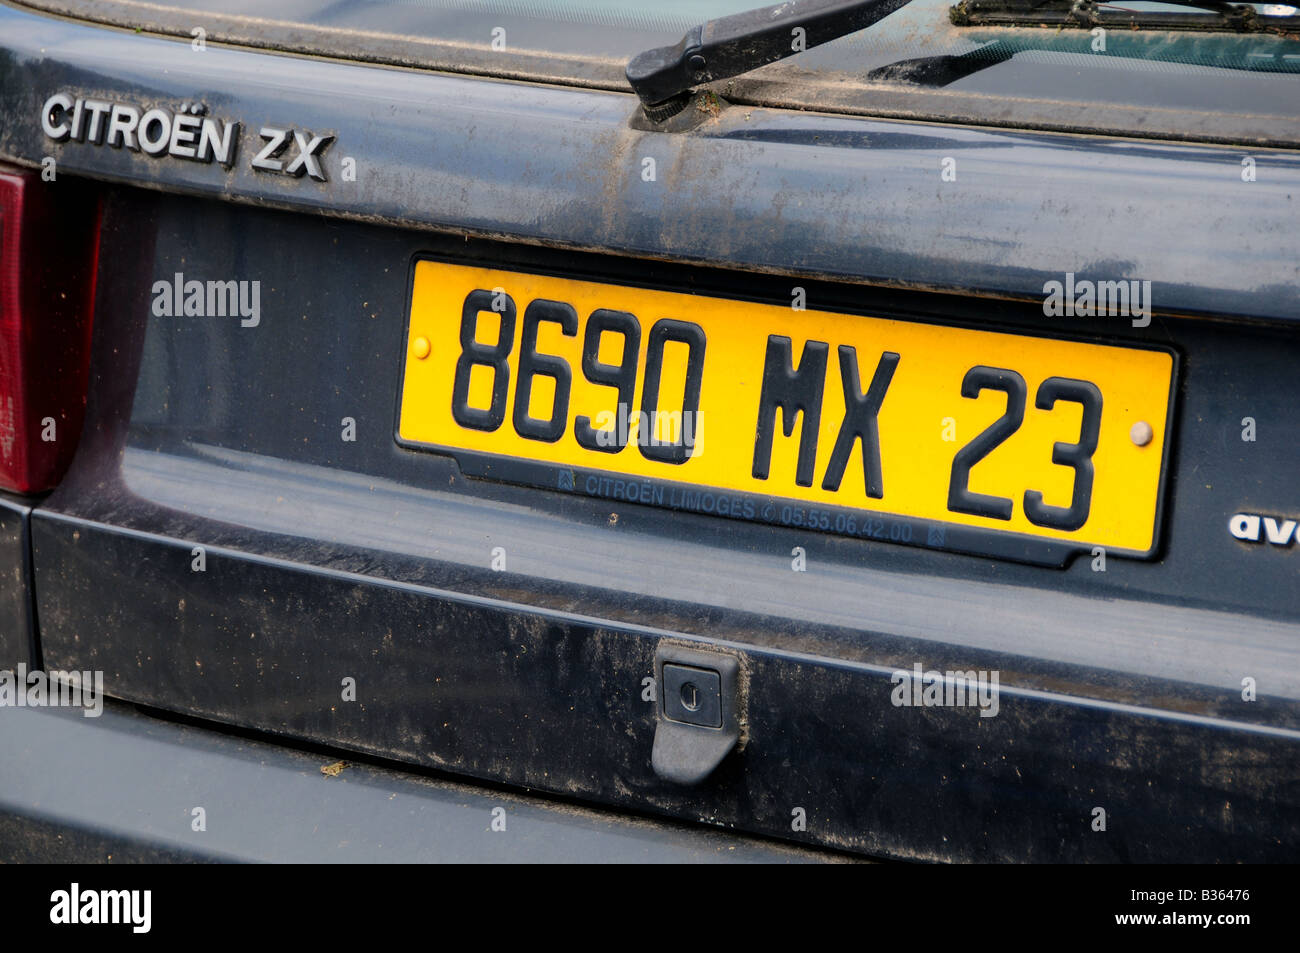 Number plate on French Citreon car Stock Photo